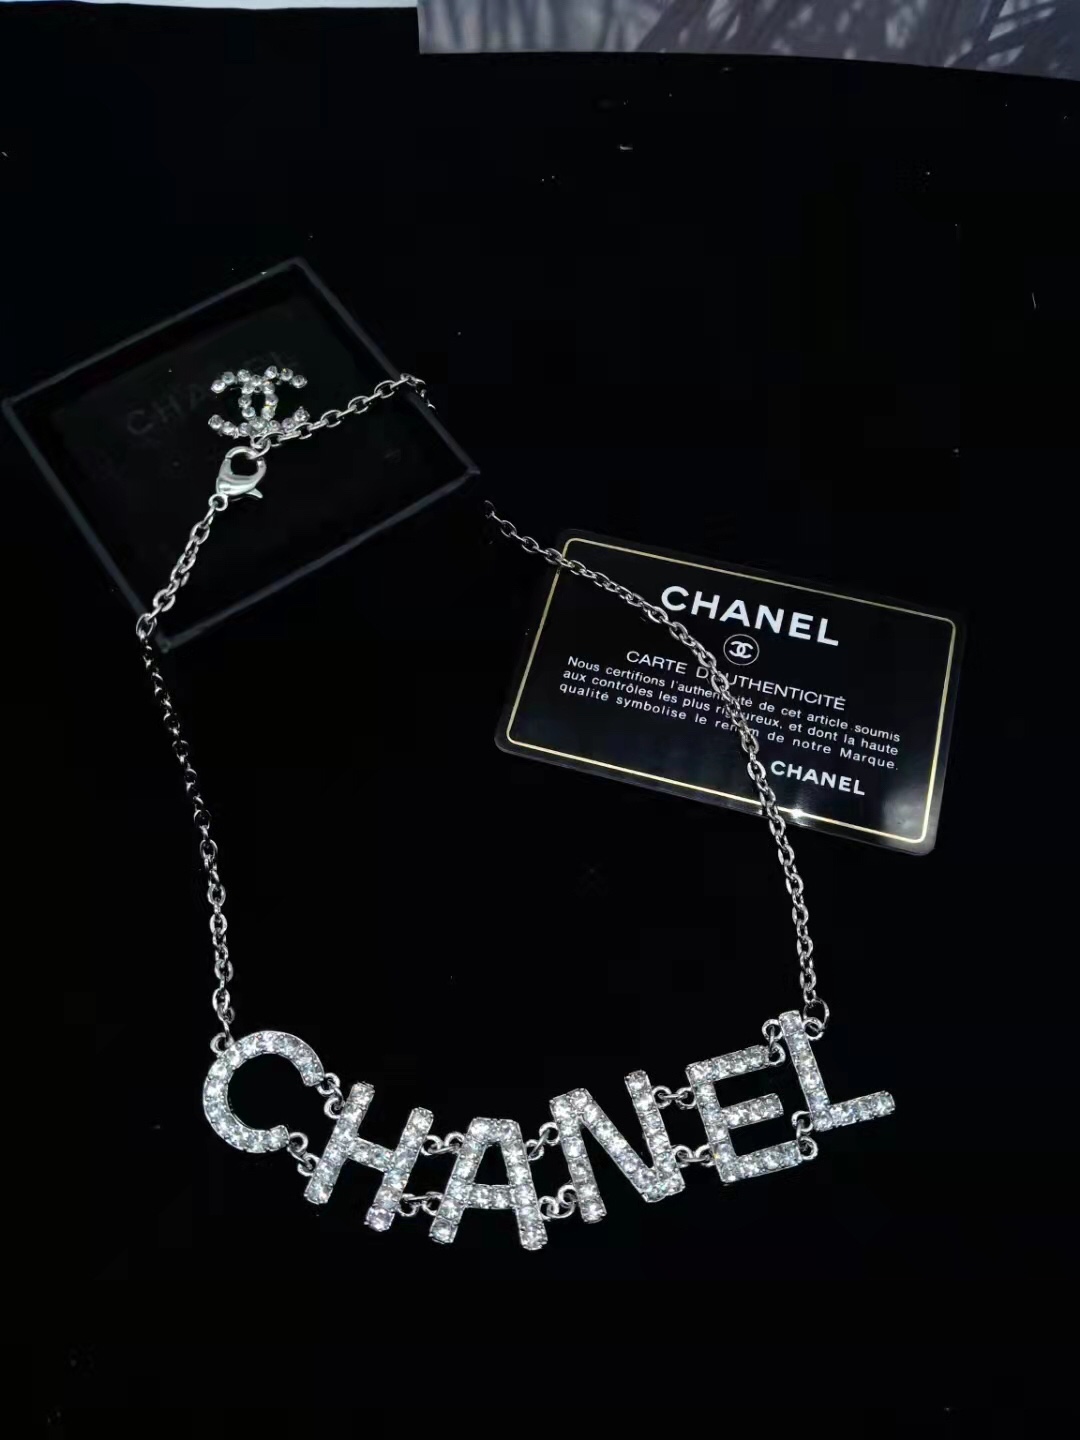 Chanel necklace 108358